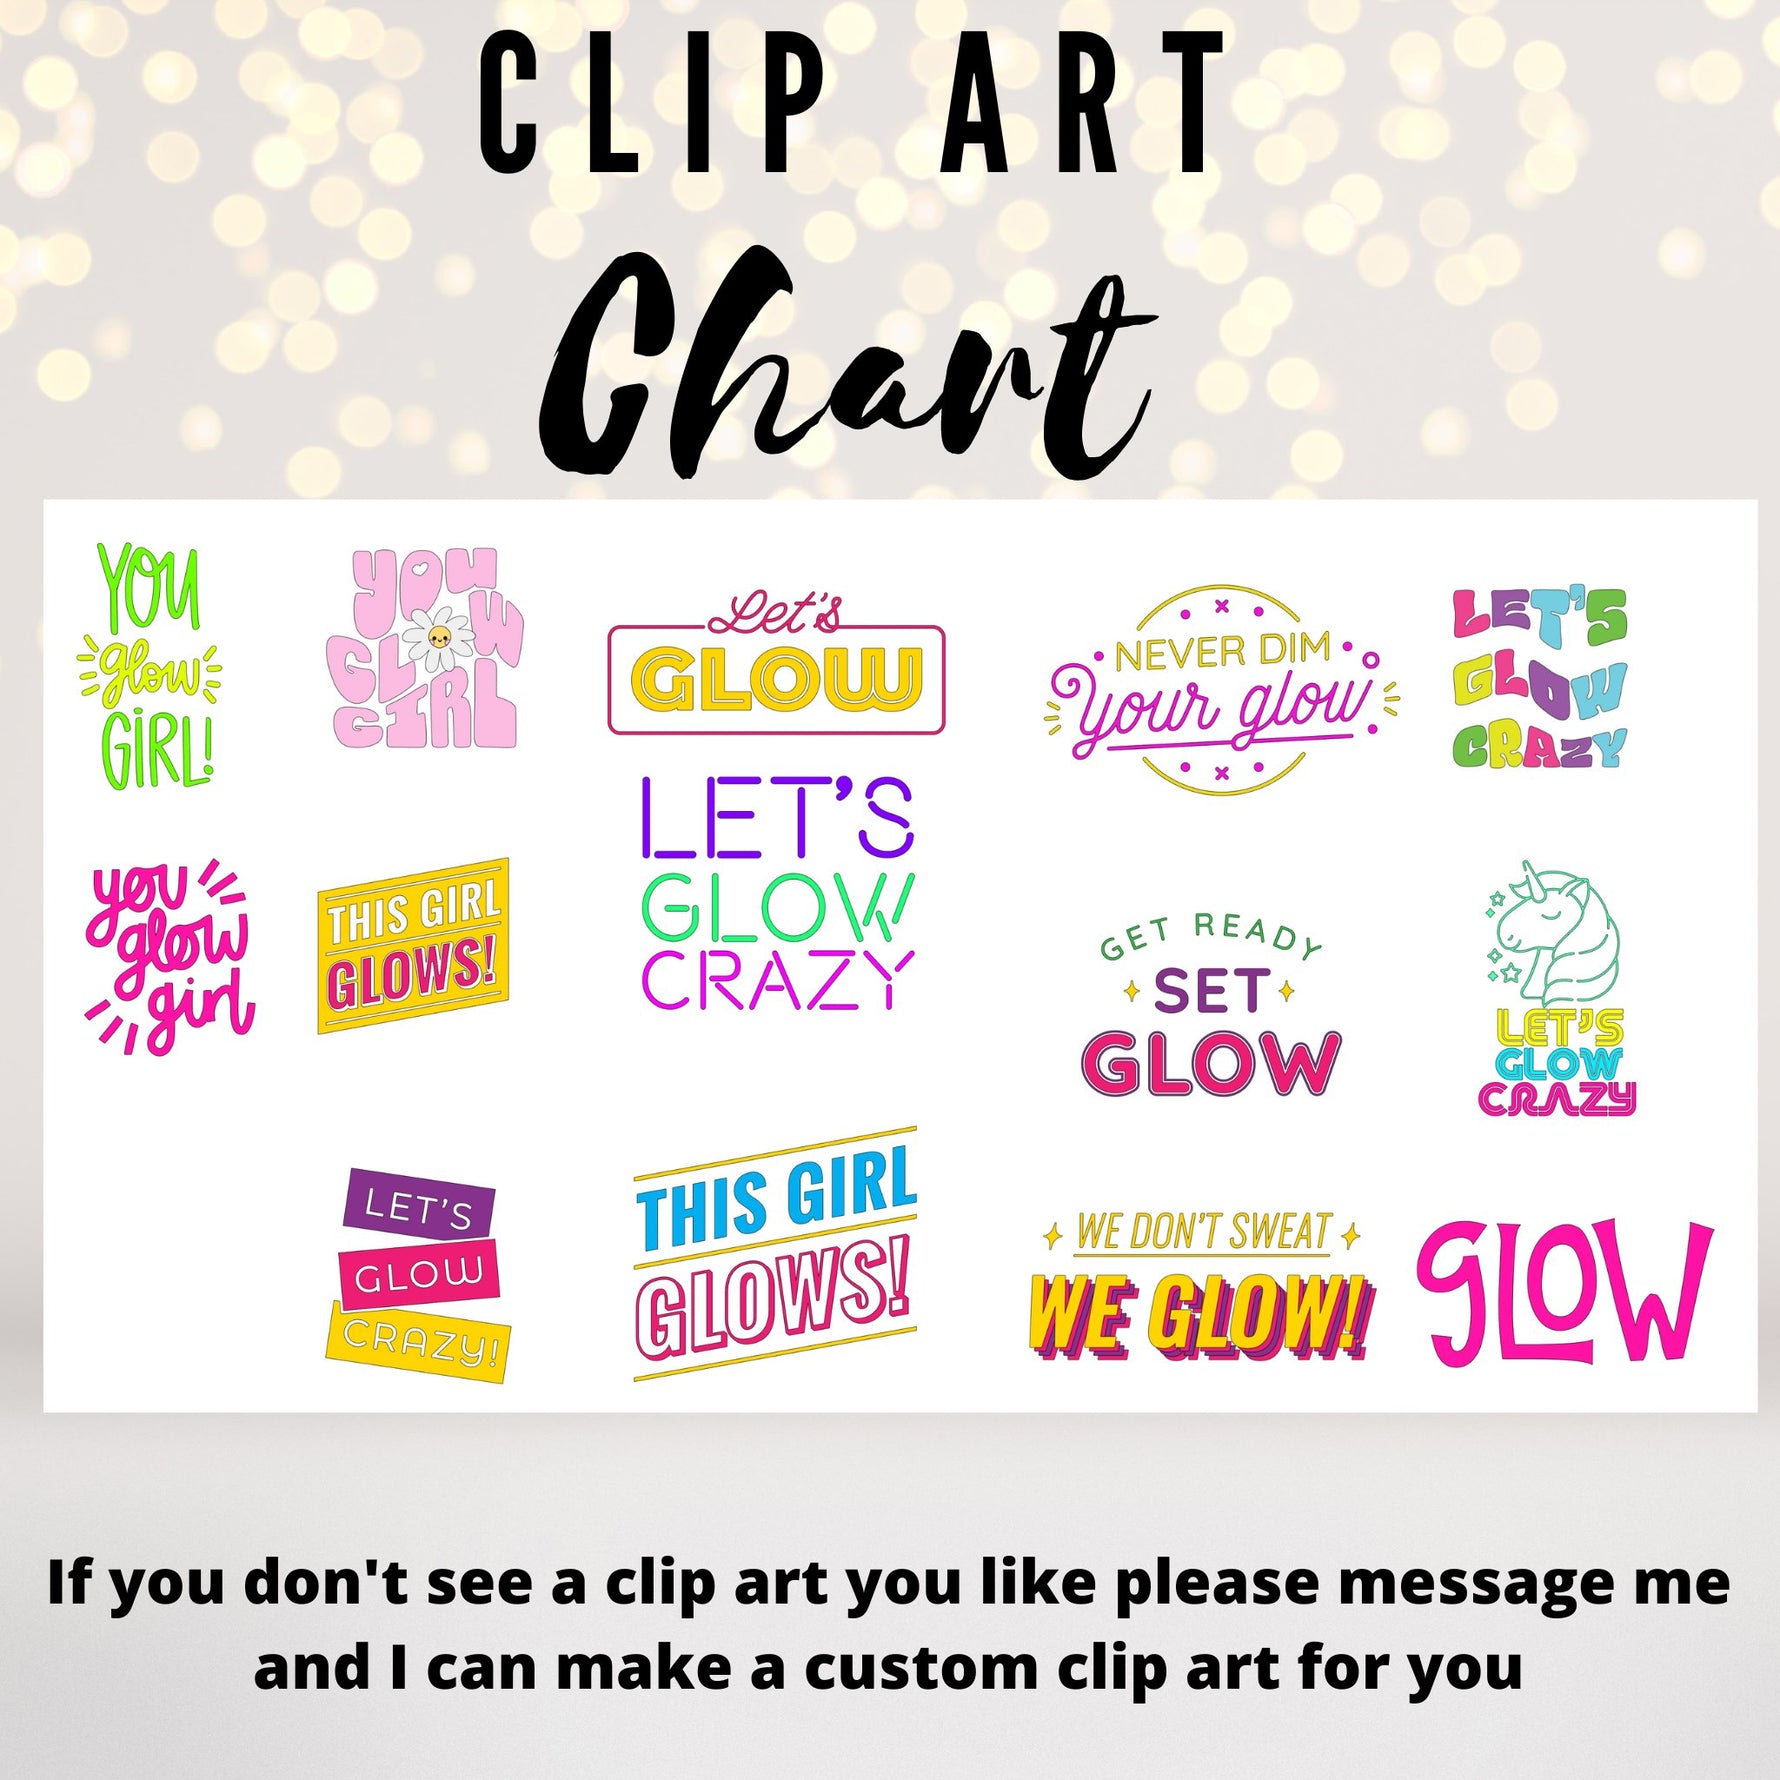 Personalization art work for Glow Party-Glow in the Dark Party Sleepover Kit- Neon Party Supplies